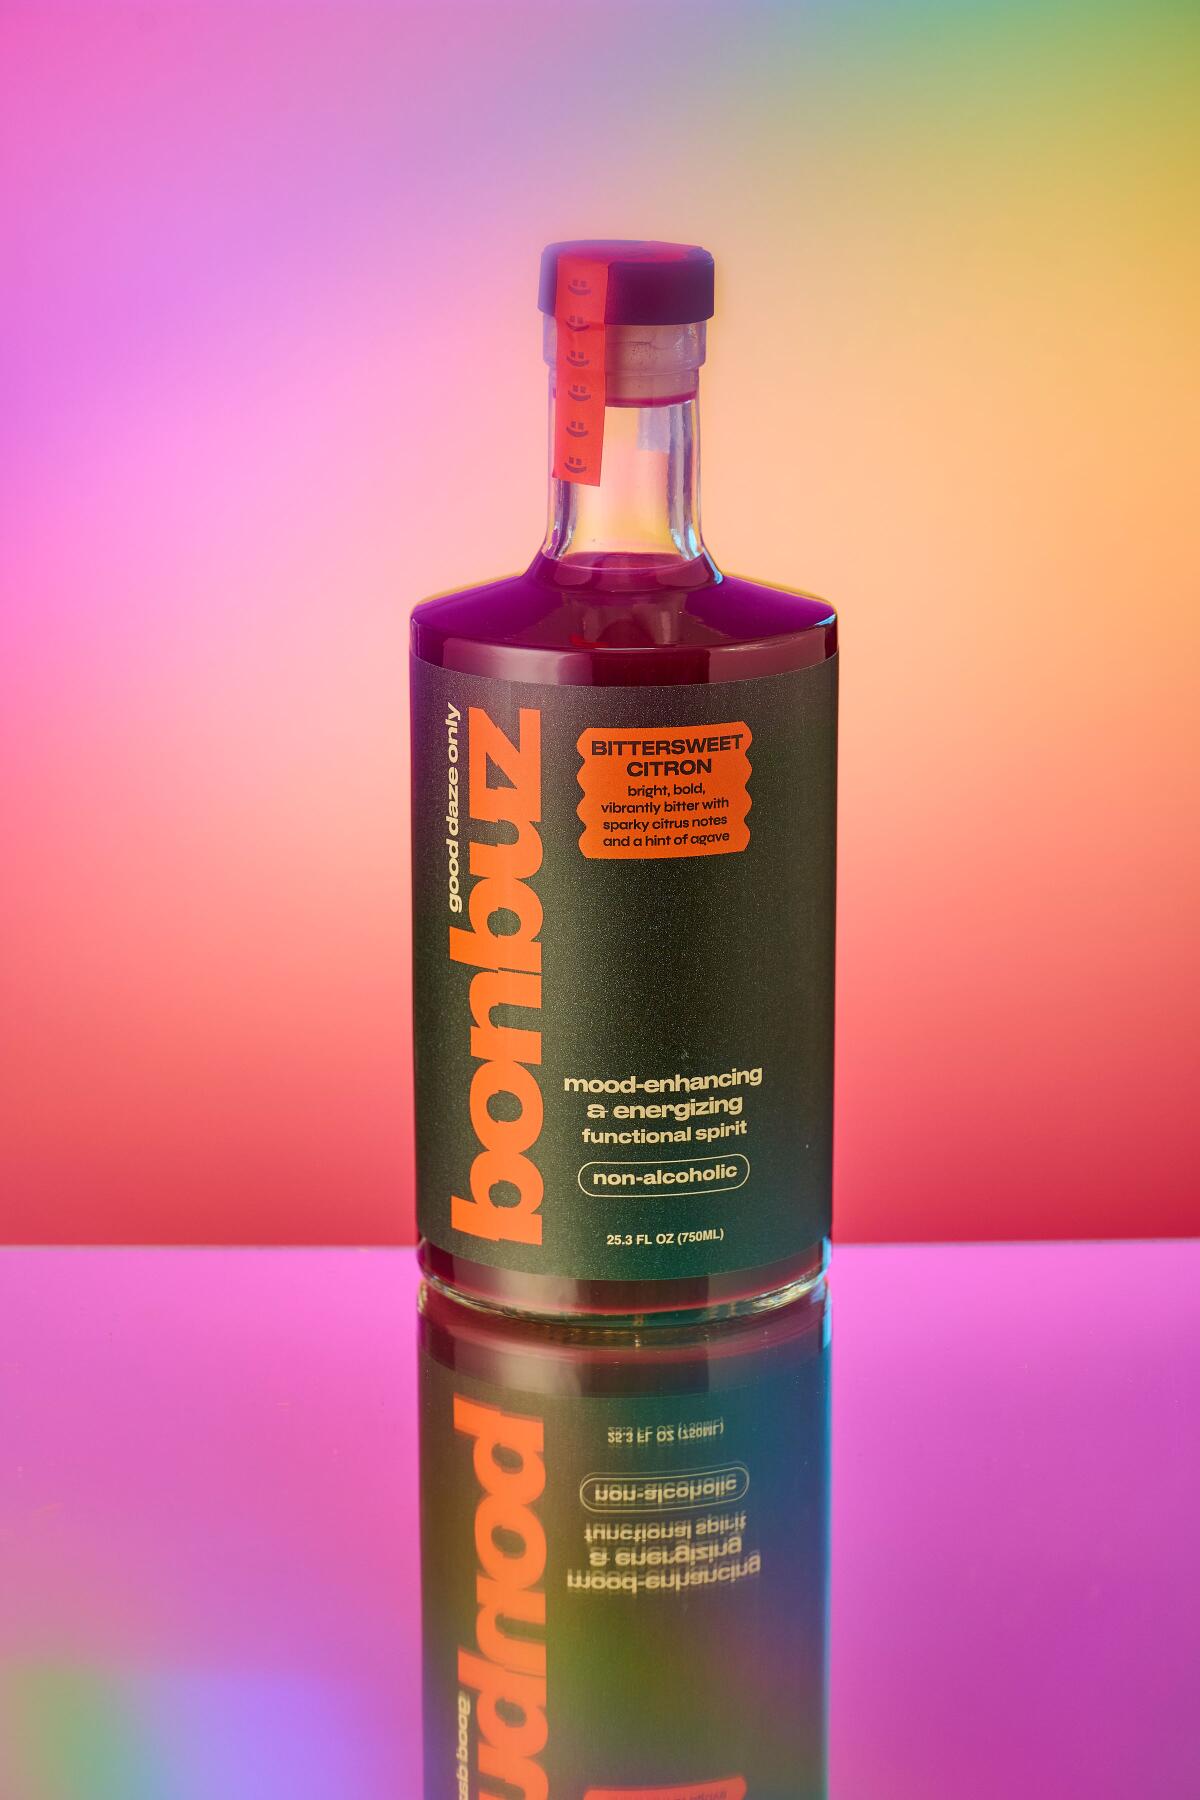 Bonbuz Bittersweet Citron, a non-alcoholic spirit with citrus, ginger and gentian.